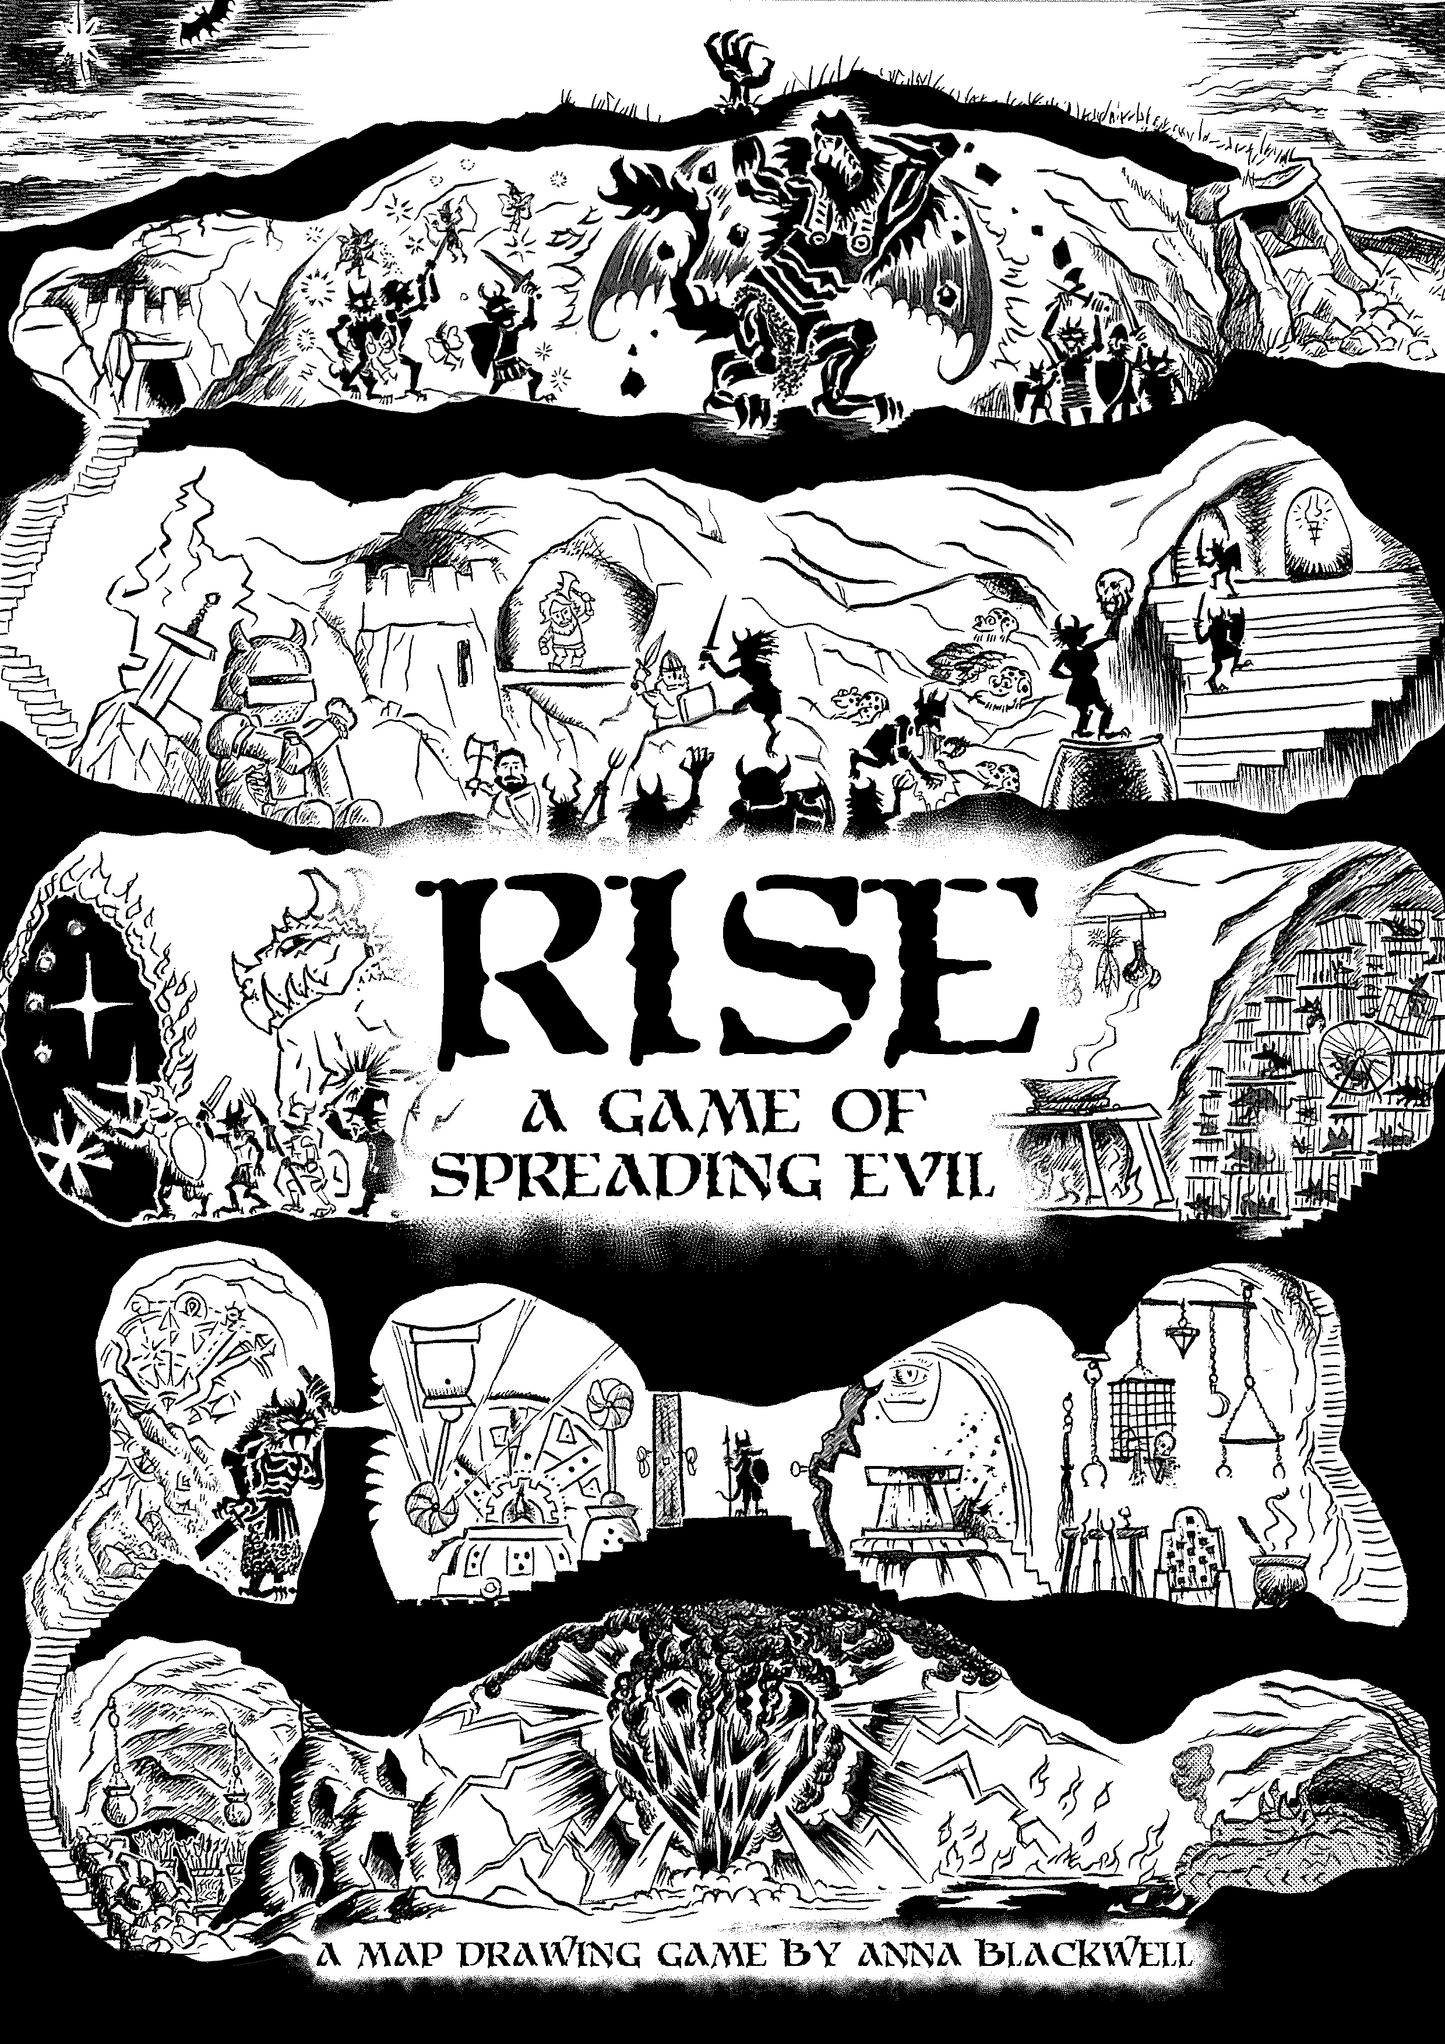 RISE: A Game of Spreading Evil